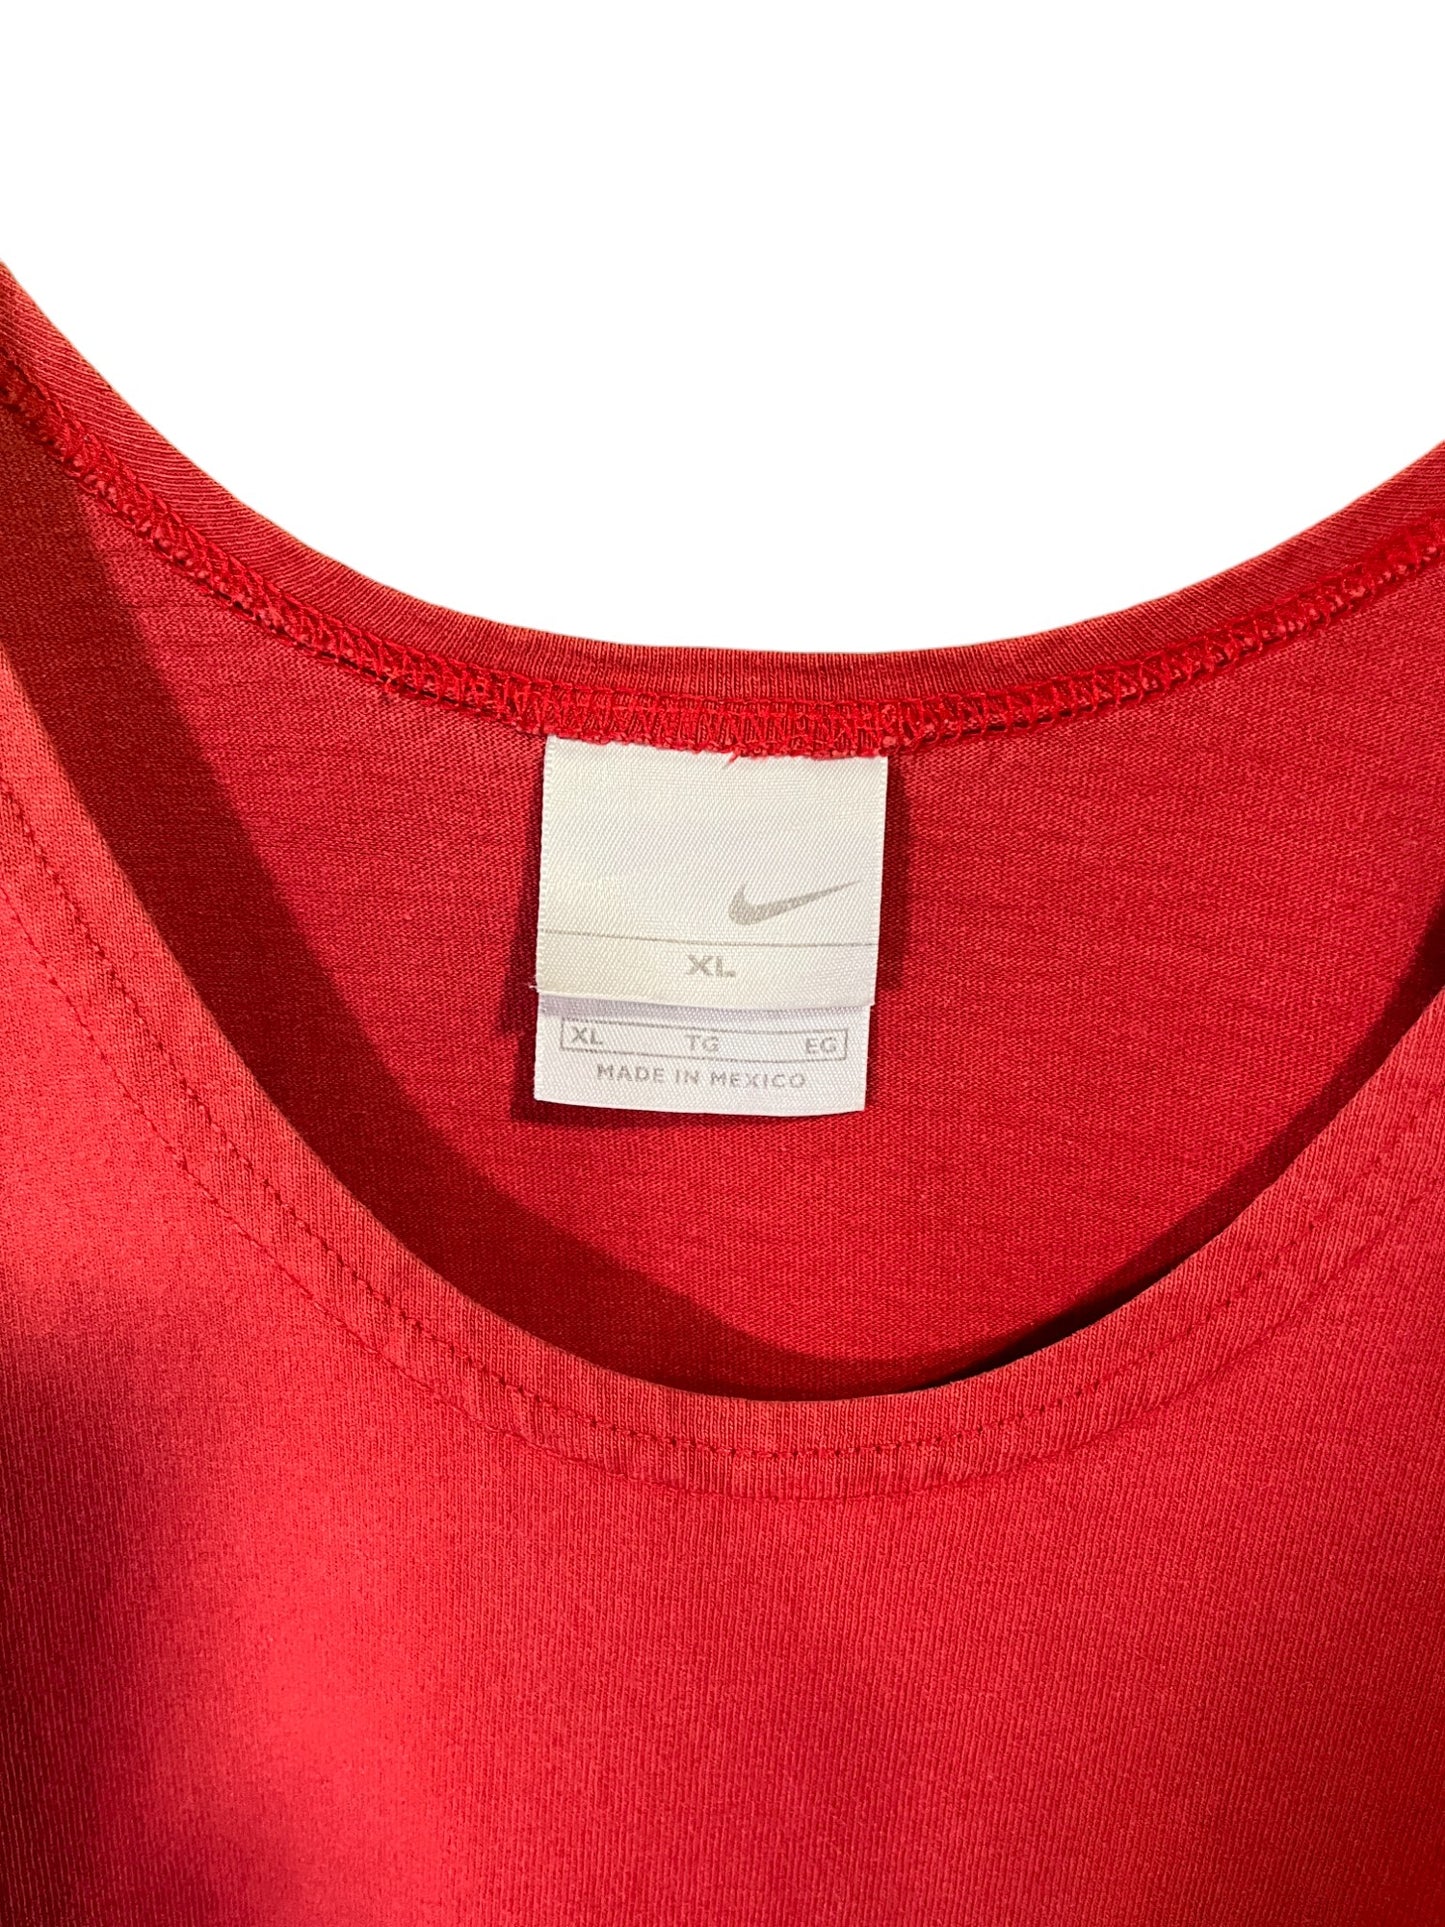 Vintage 00's Nike Small Swoosh Red Tank Top Size XL